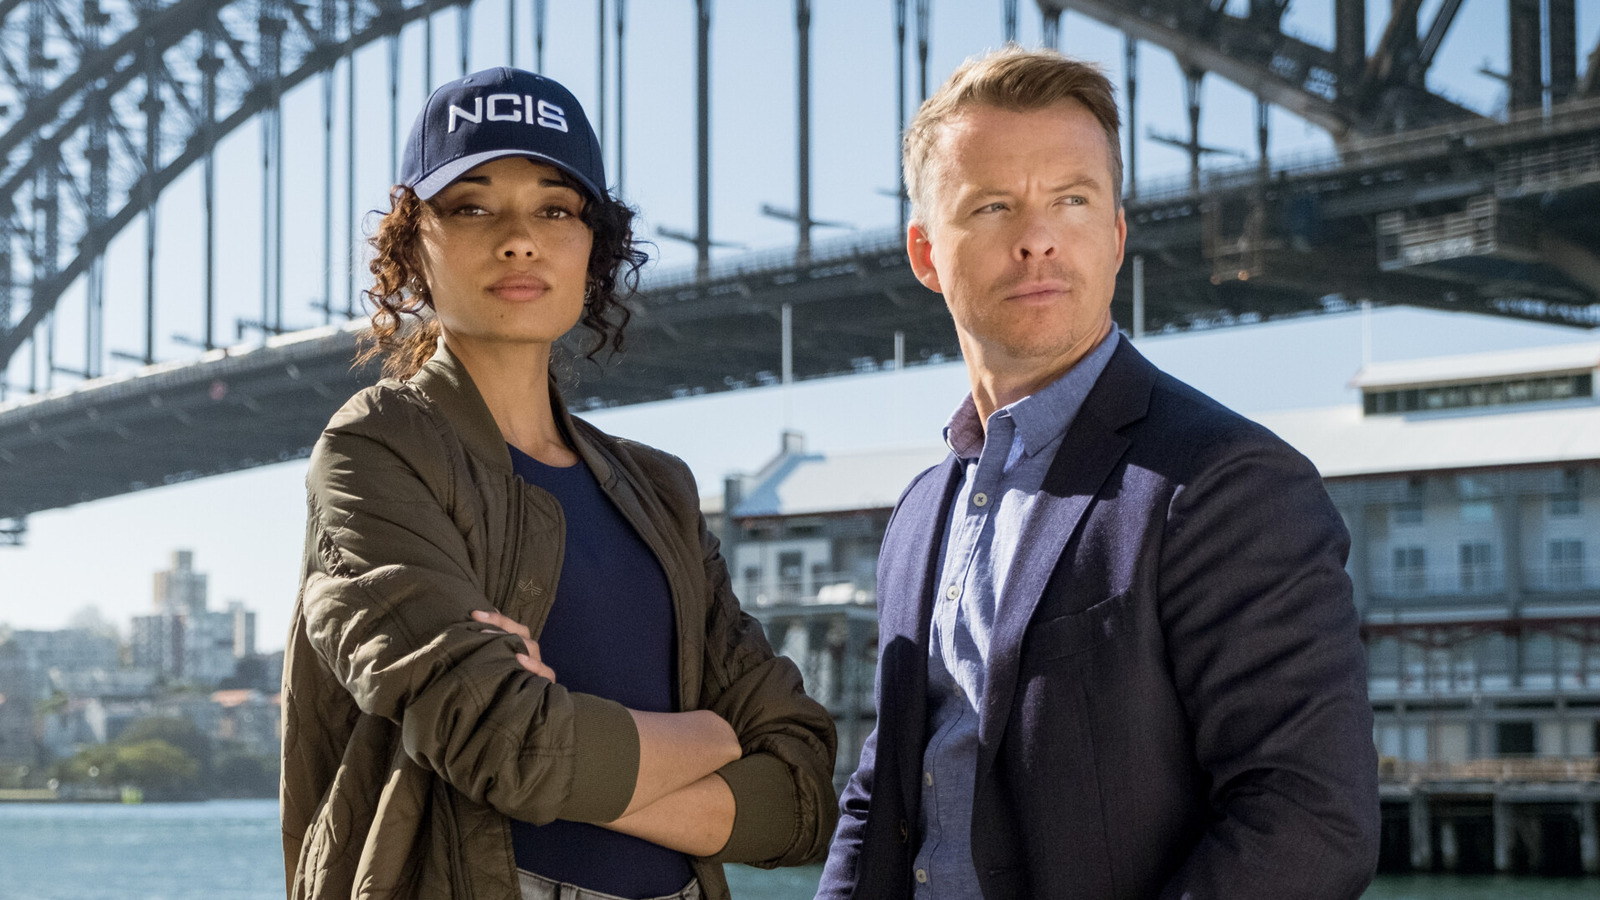 NCIS Sydney When Is The 2023 Premiere Date?